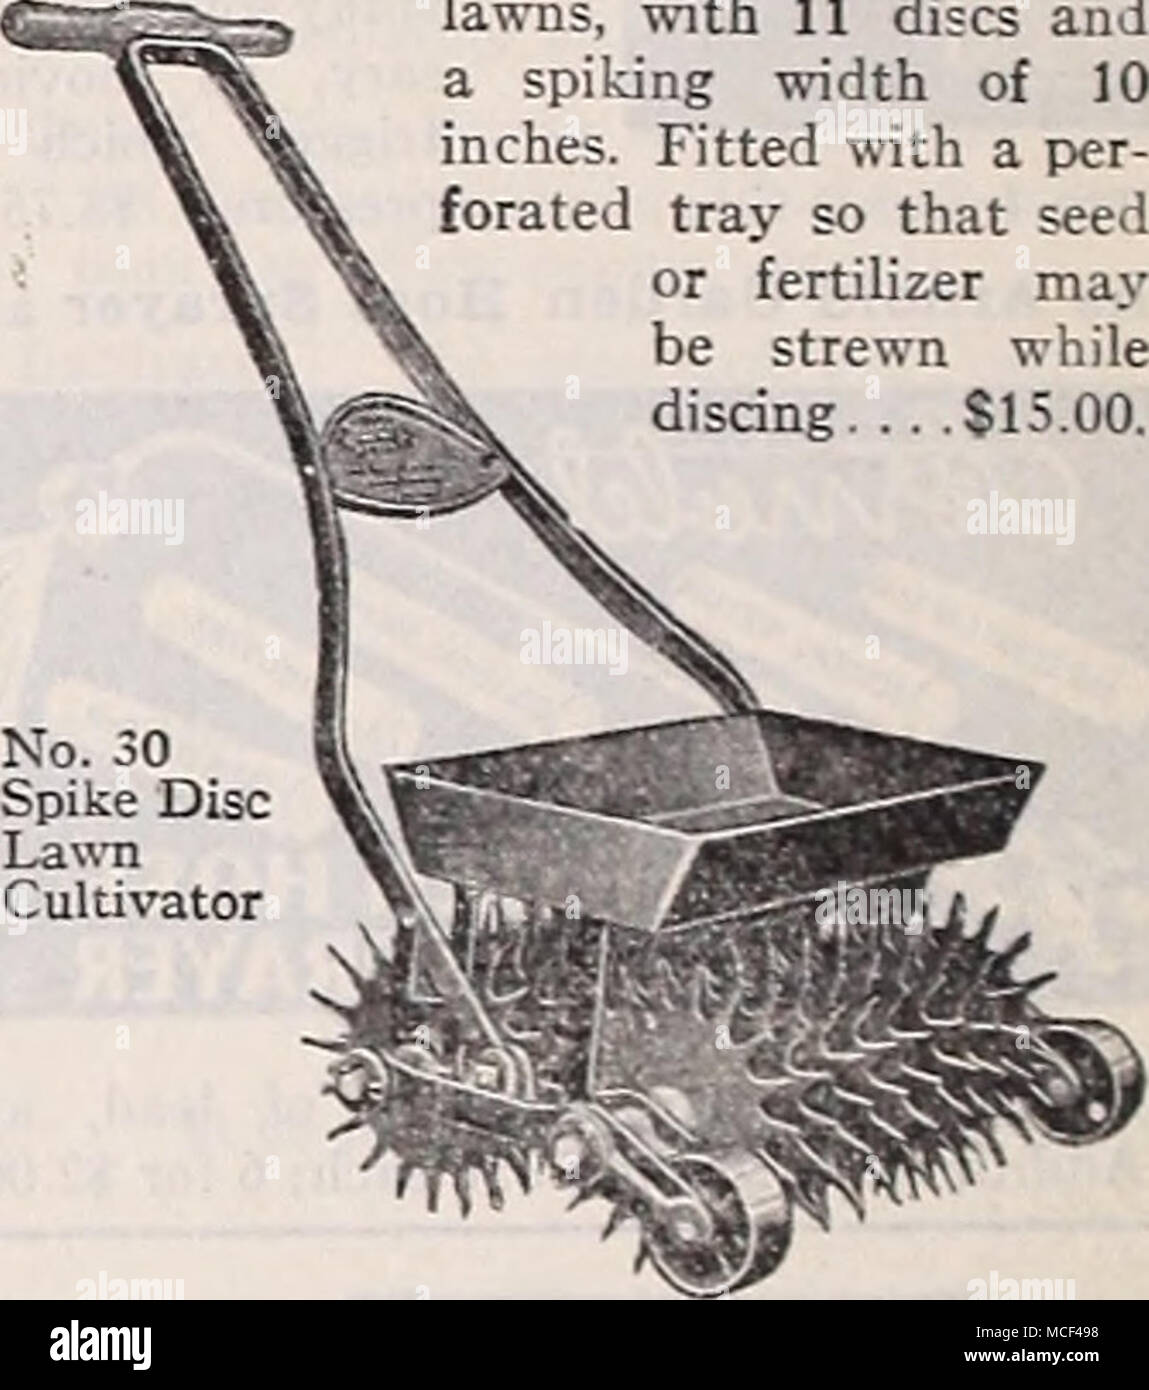 . No. 30 Spike Disc Lawn Cultivator Lawn Trimmers Pennsylvania Undercut. Con- structed with a slanting side plate and a conical cylinder making it possible to cut all grass left by the regular mower. Width of cut 6 inches, $11.95. Stock Photo